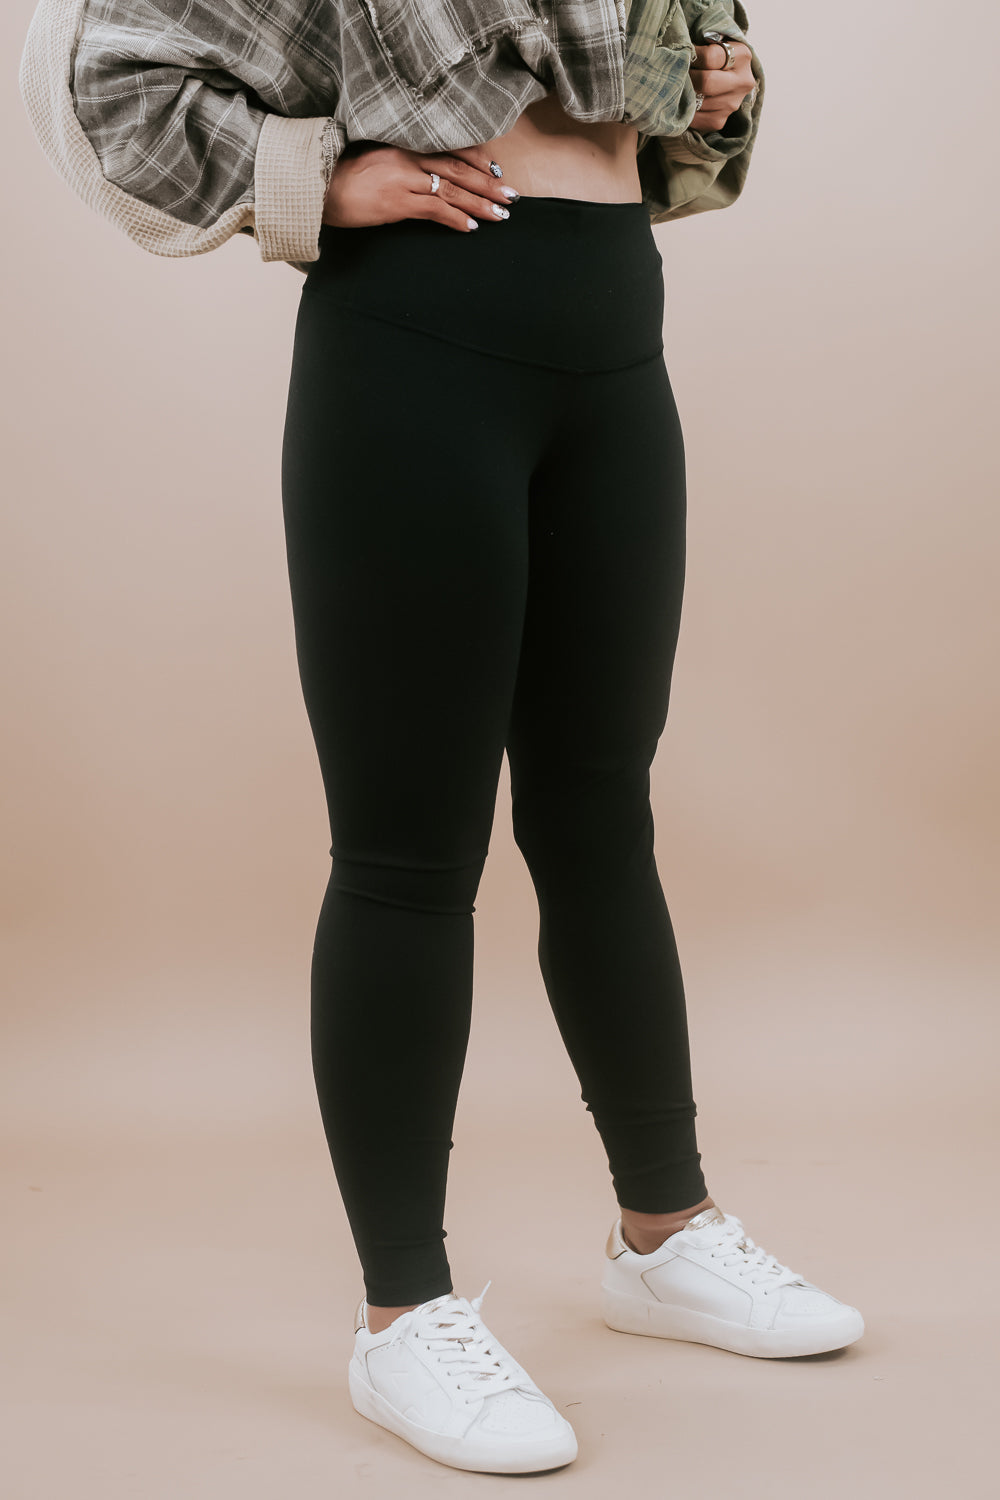 On The Go Legging, Black – Everyday Chic Boutique